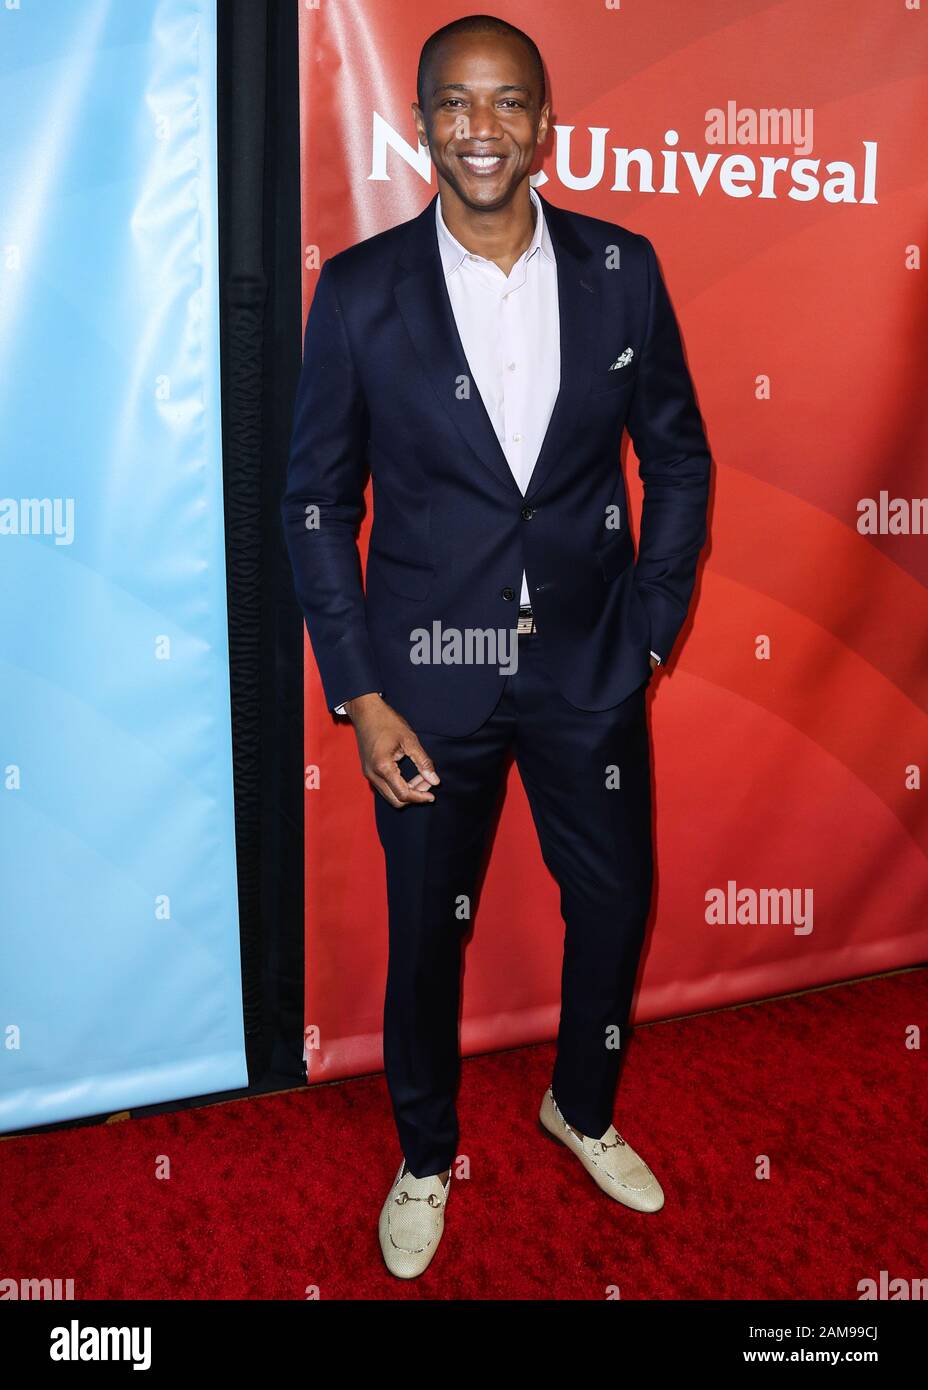 PASADENA, LOS ANGELES, CALIFORNIA, USA - JANUARY 11: J. August Richards arrives at the 2020 NBCUniversal Winter TCA Press Tour held at The Langham Huntington Hotel on January 11, 2020 in Pasadena, Los Angeles, California, United States. (Photo by Xavier Collin/Image Press Agency) Stock Photo